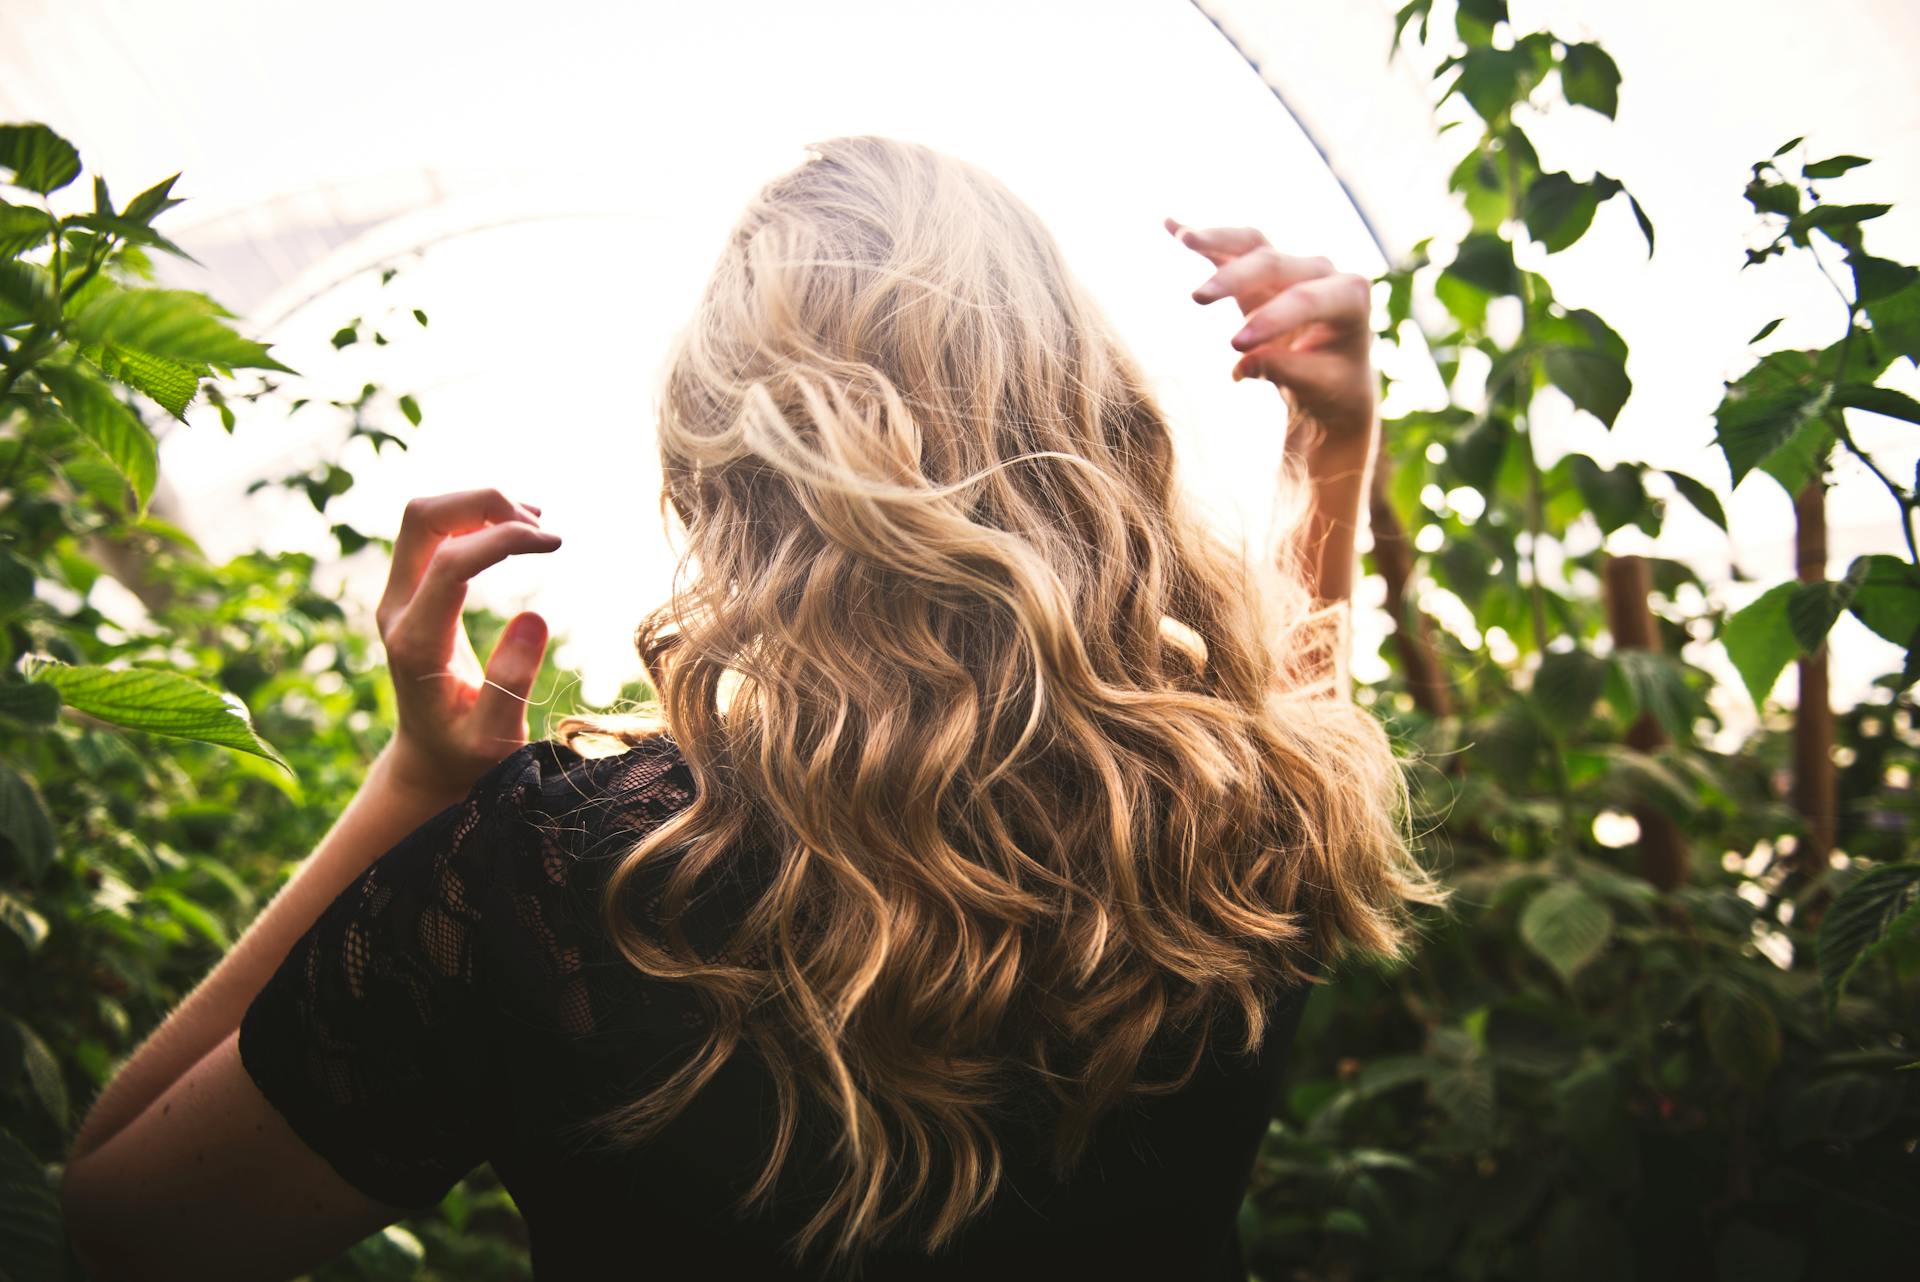 A woman with blonde hair | Source: Pexels